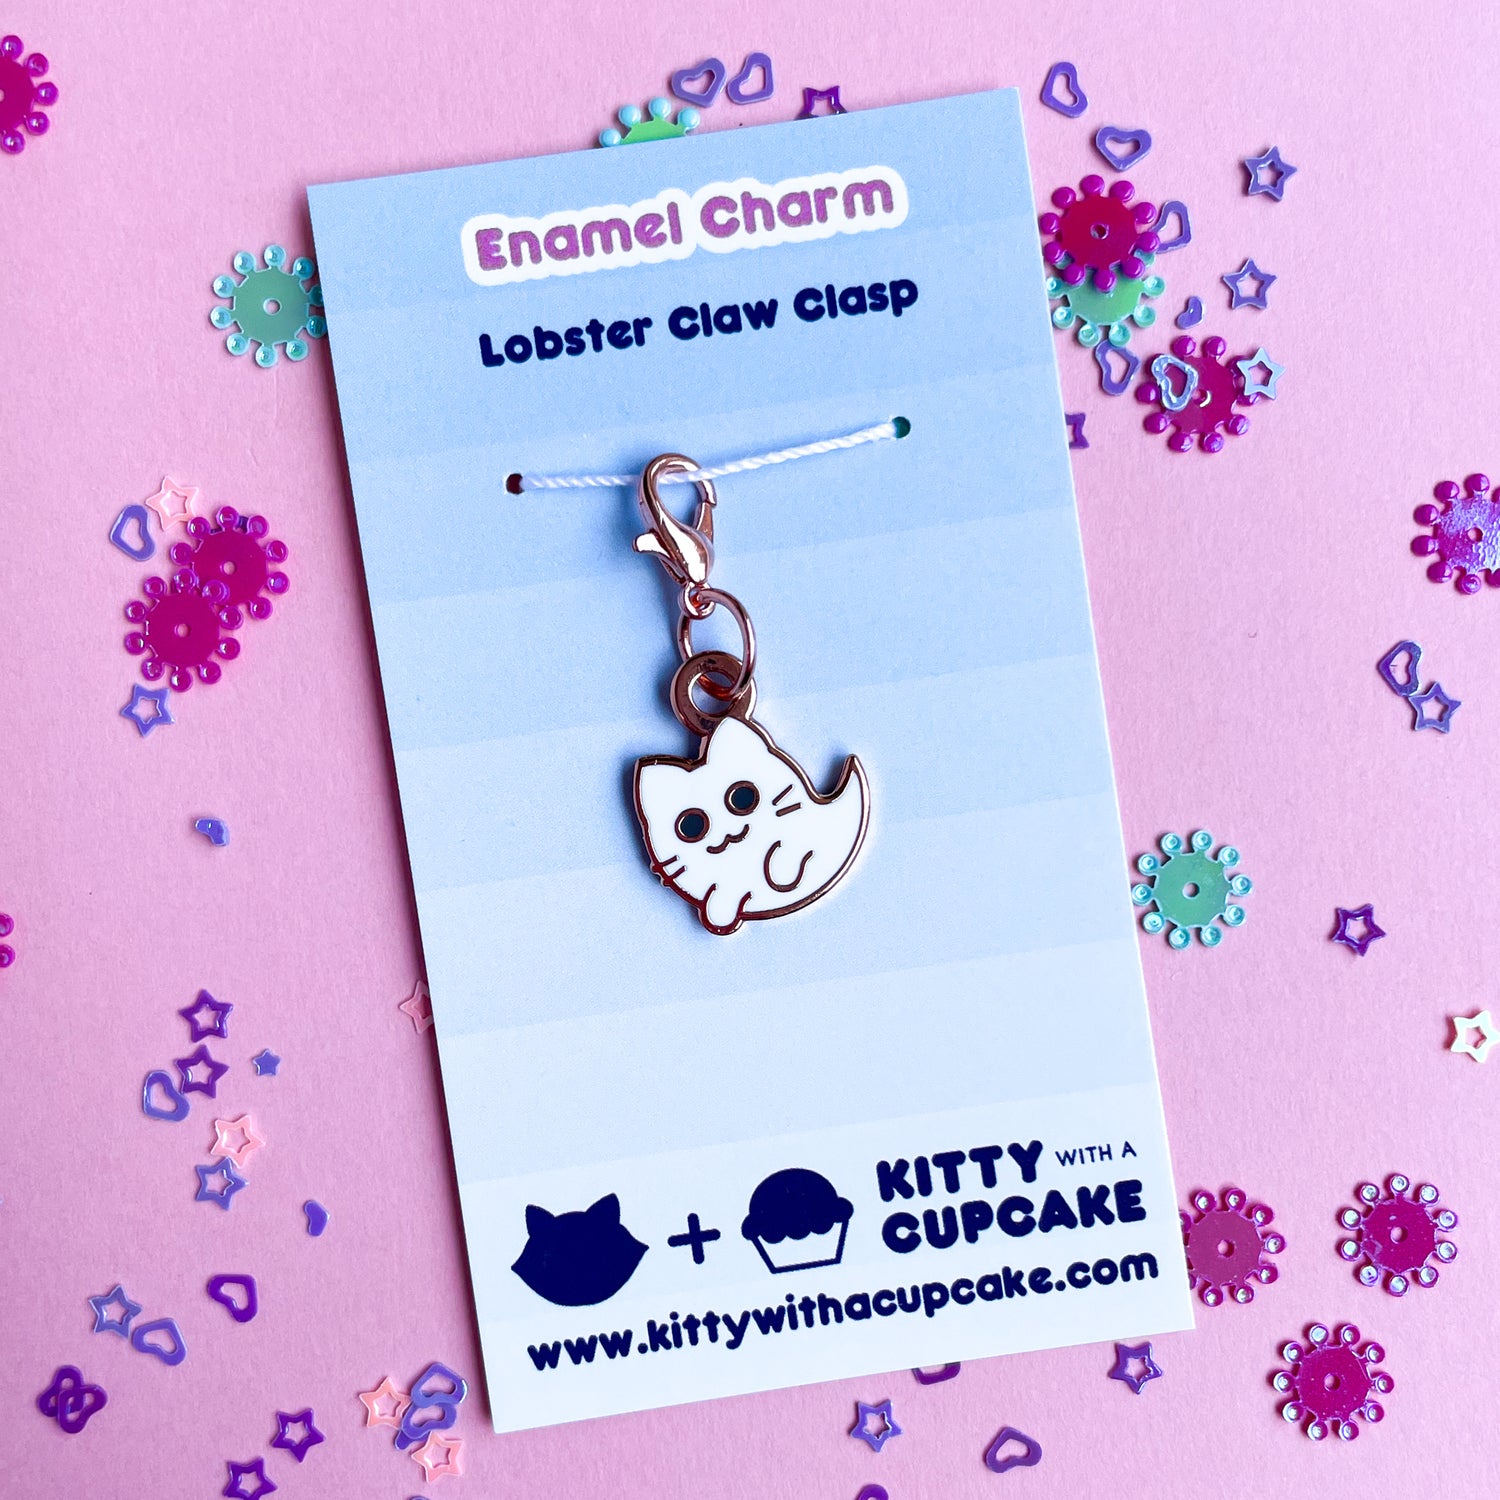 A cat ghost charm on a blue card that reads "Enamel Charm" on a pink paper background that is covered in confetti. 